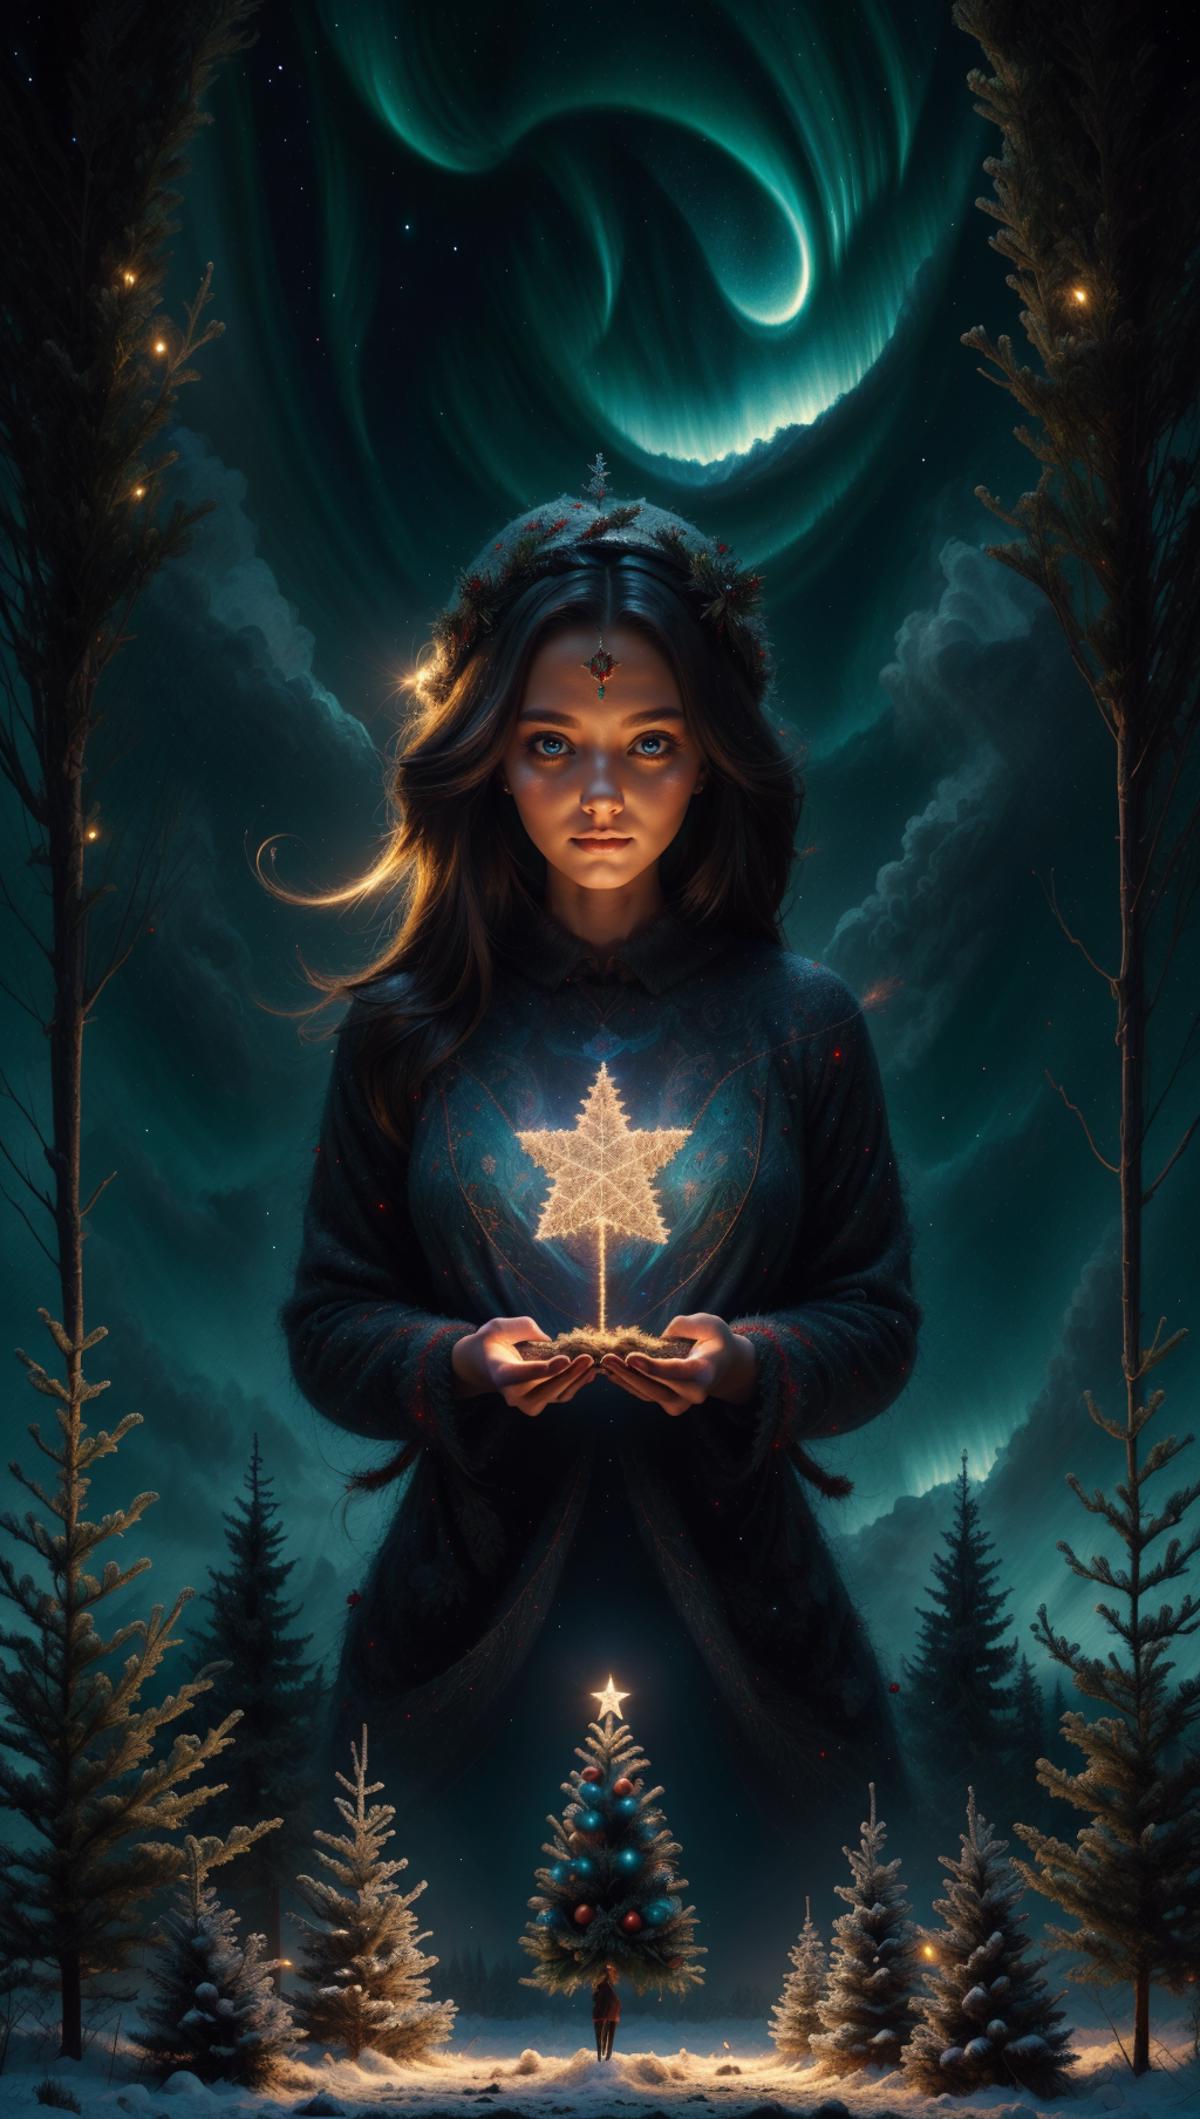 Dark and Dreamy Illustration of Girl Holding Starlight in Her Hand